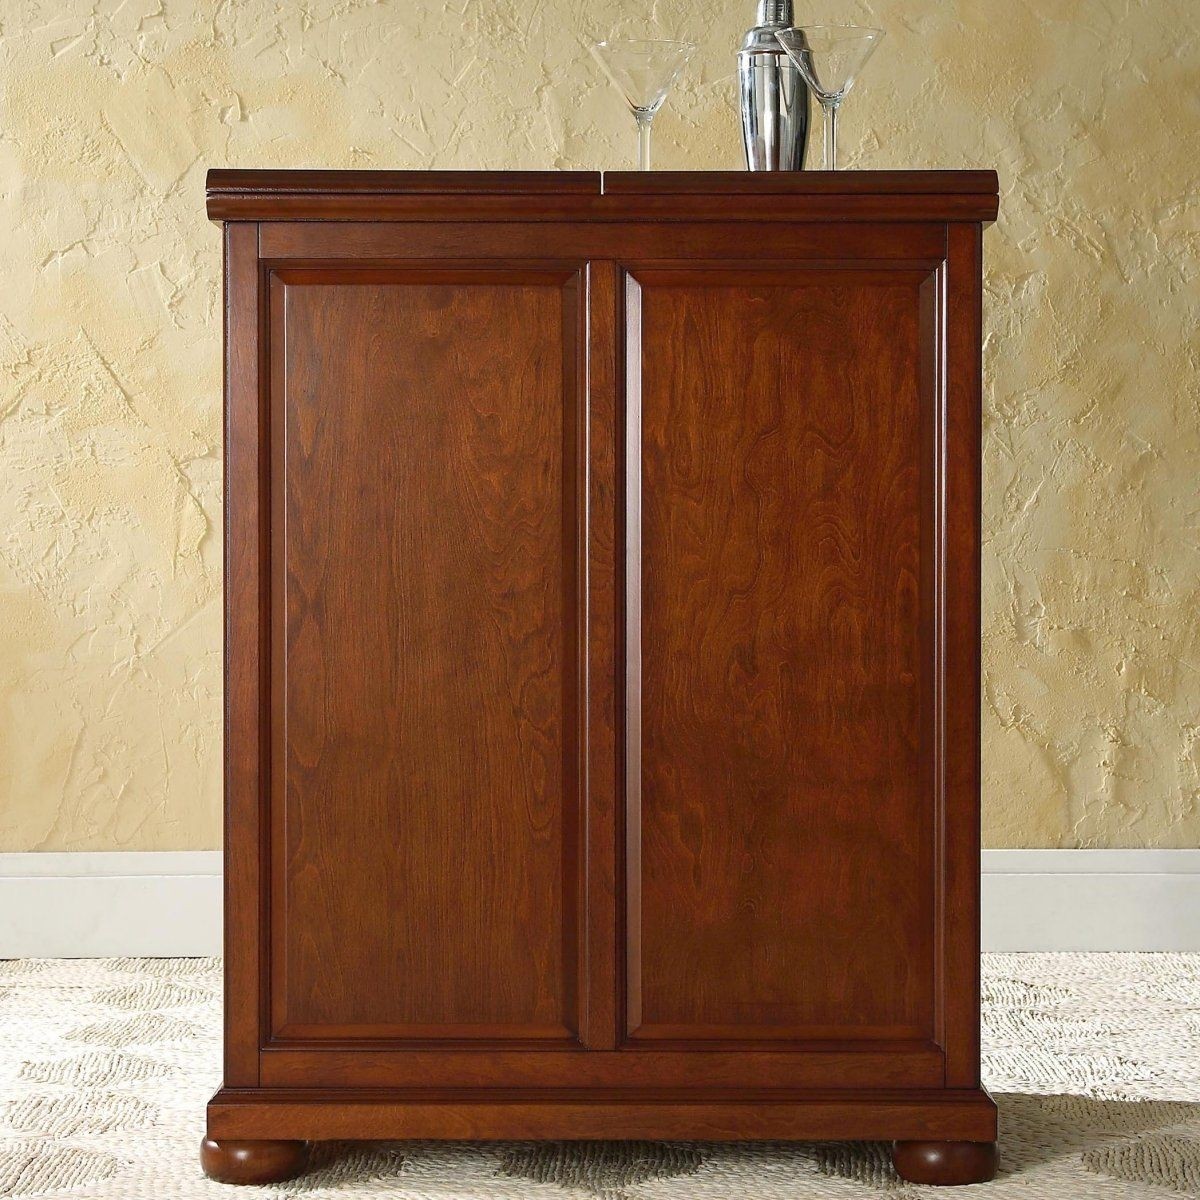 Solid wood bar cabinet